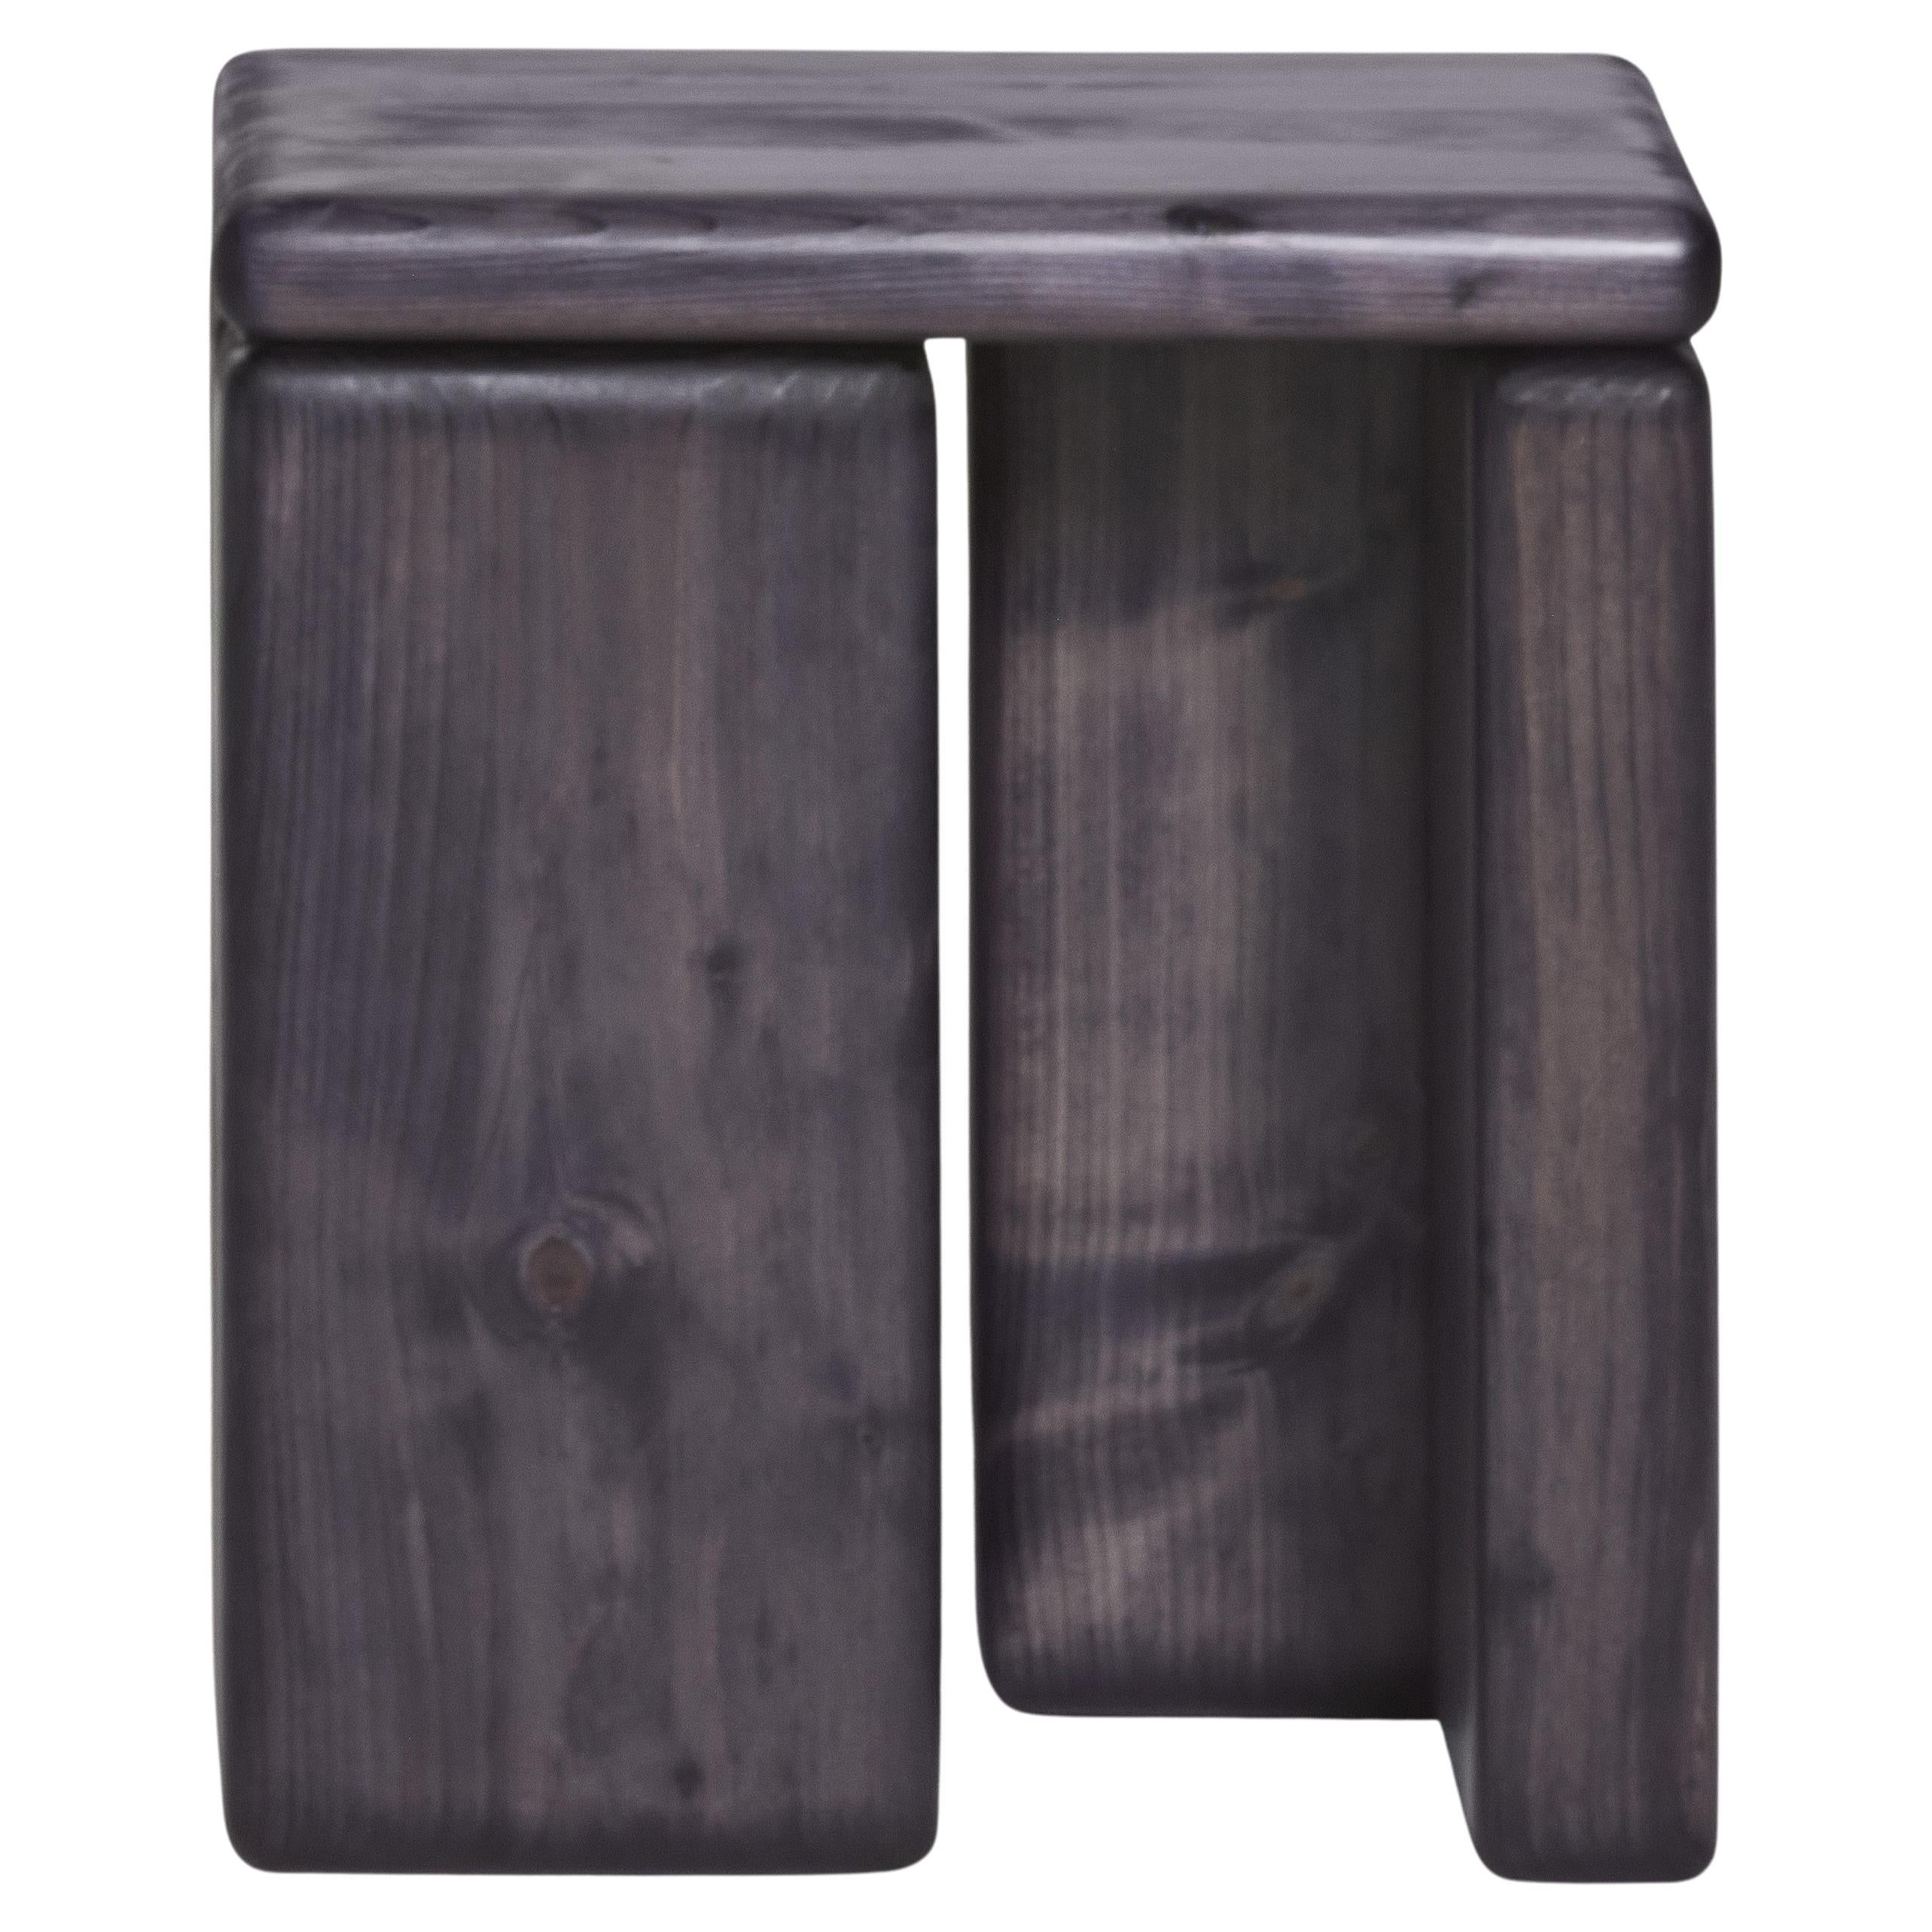 Timber Stool Indigo Blue by Onno Adriaanse For Sale